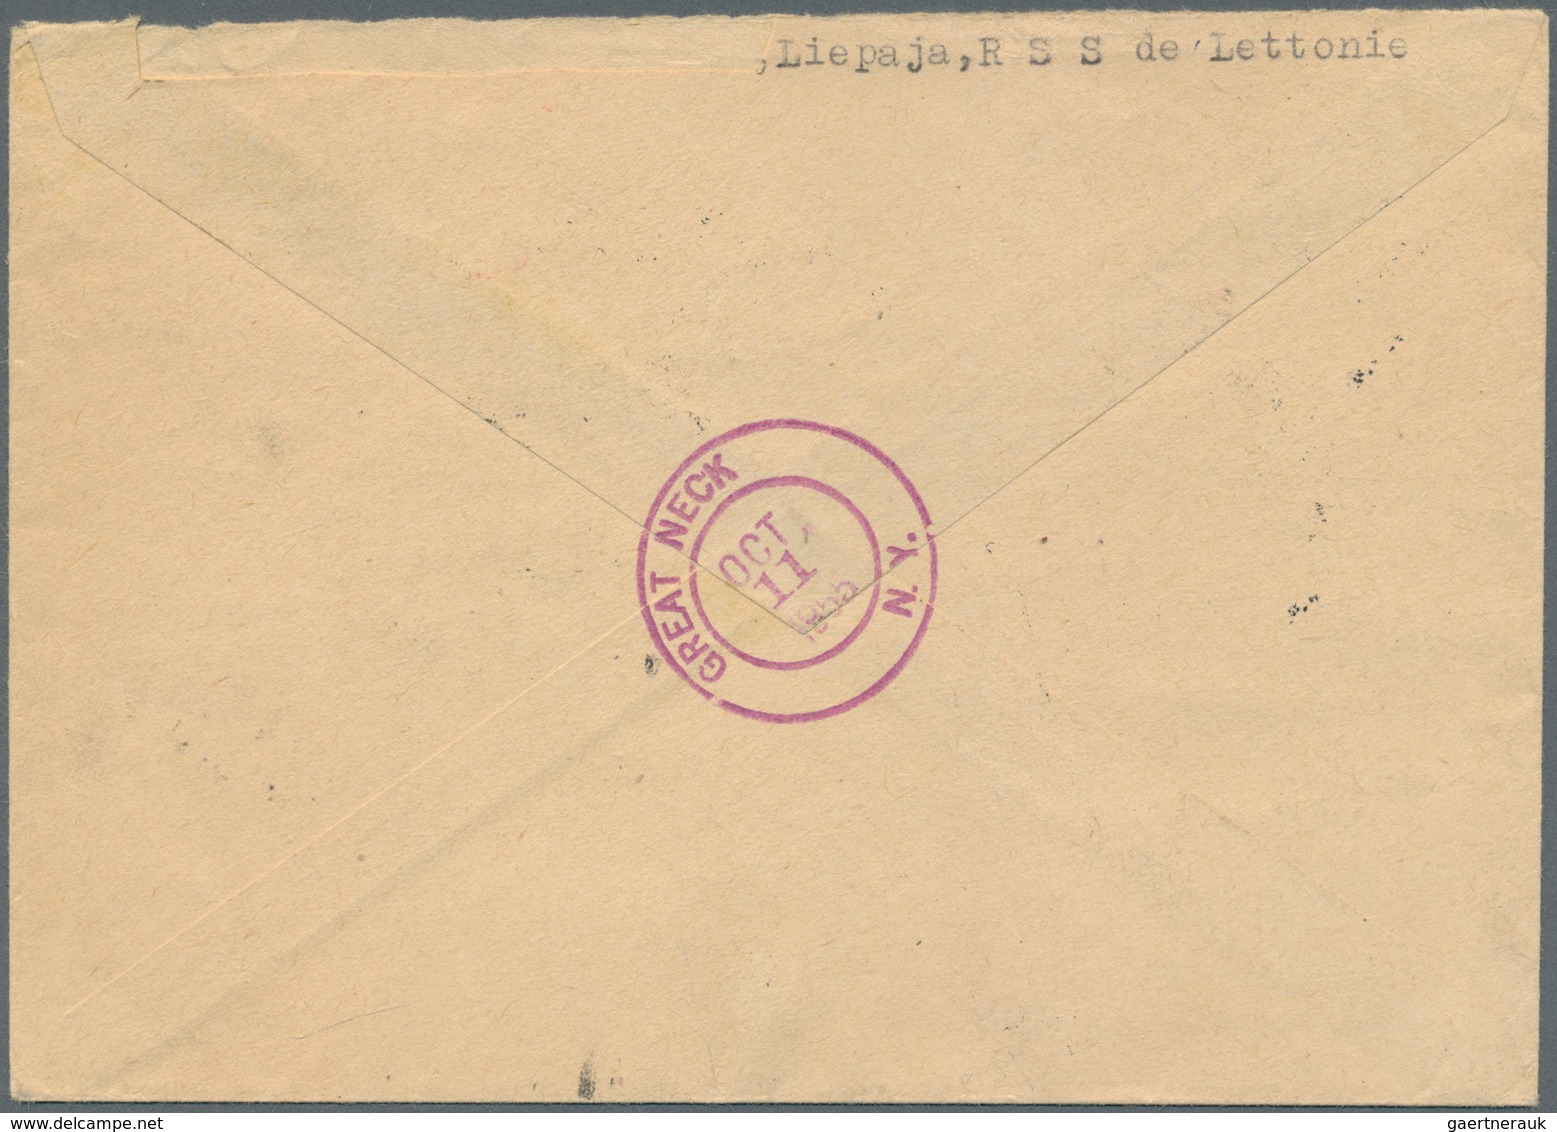 Sowjetunion: 1955 Registered Airmail Cover From Liepaya (Latvia) To USA With Scarce Franking Of The - Covers & Documents